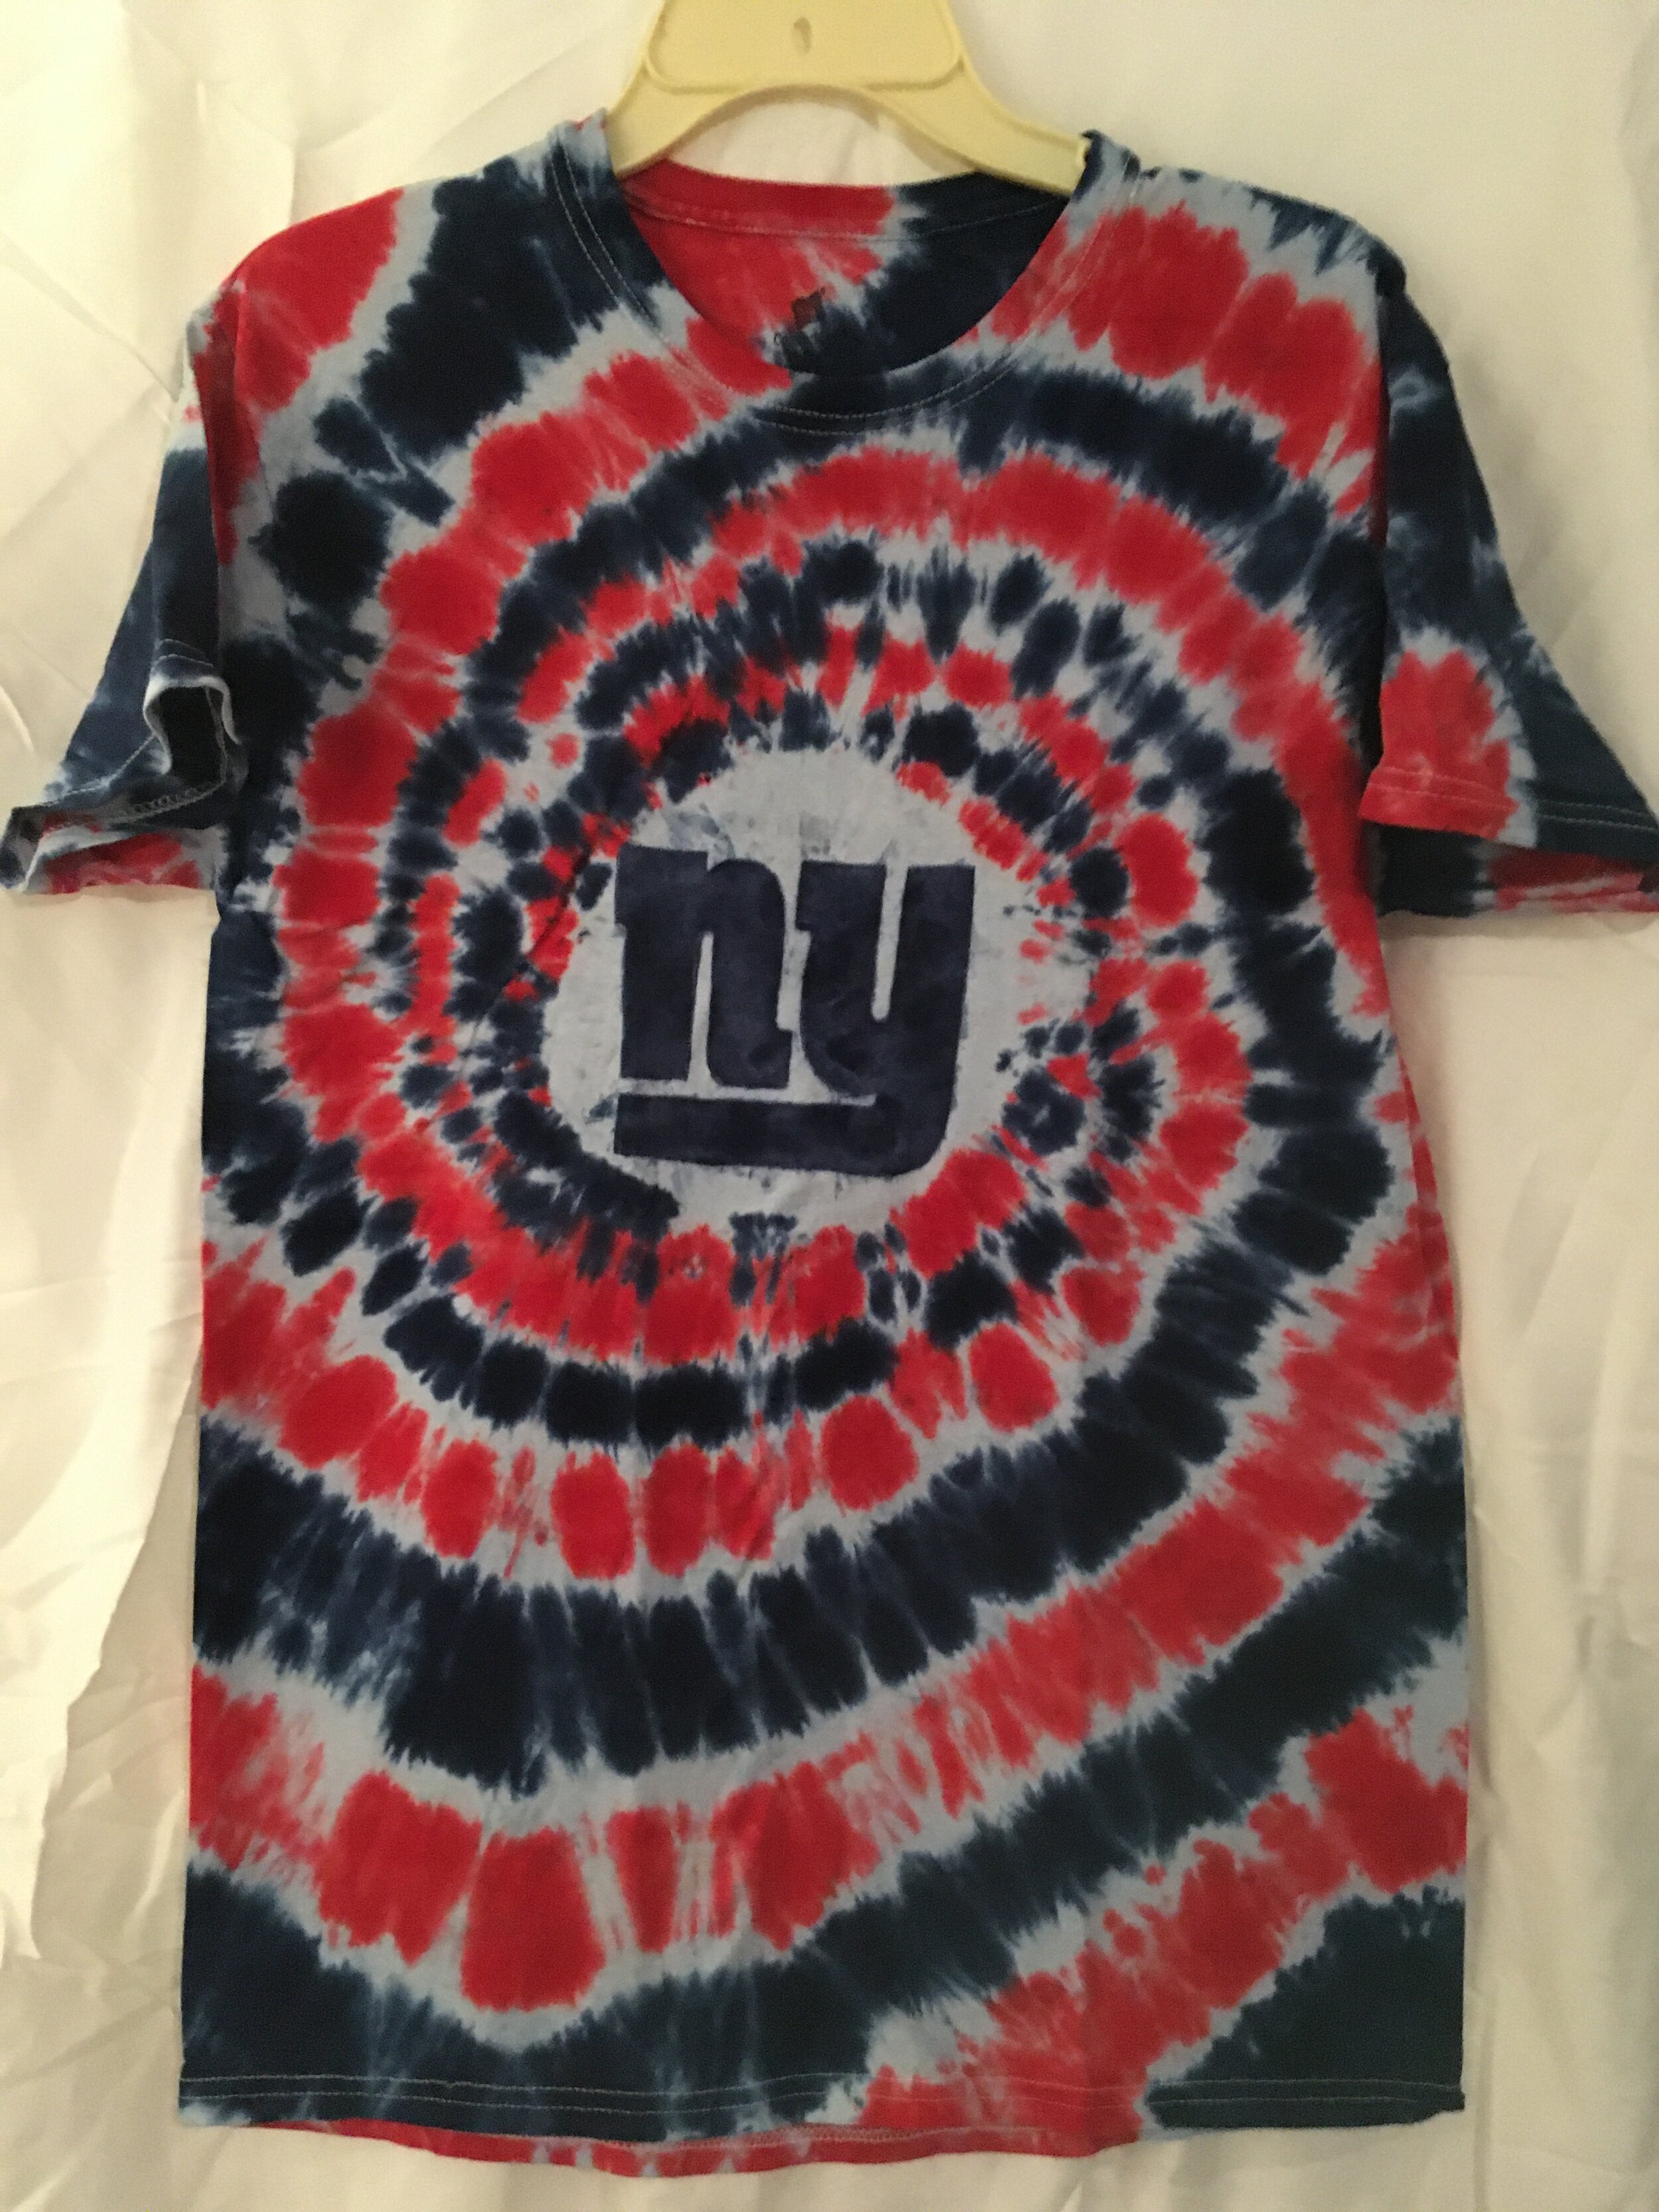 New York Giants Tie Dyed T-Shirt-V Neck or Crew Neck — Soul Shine Tie Dyes